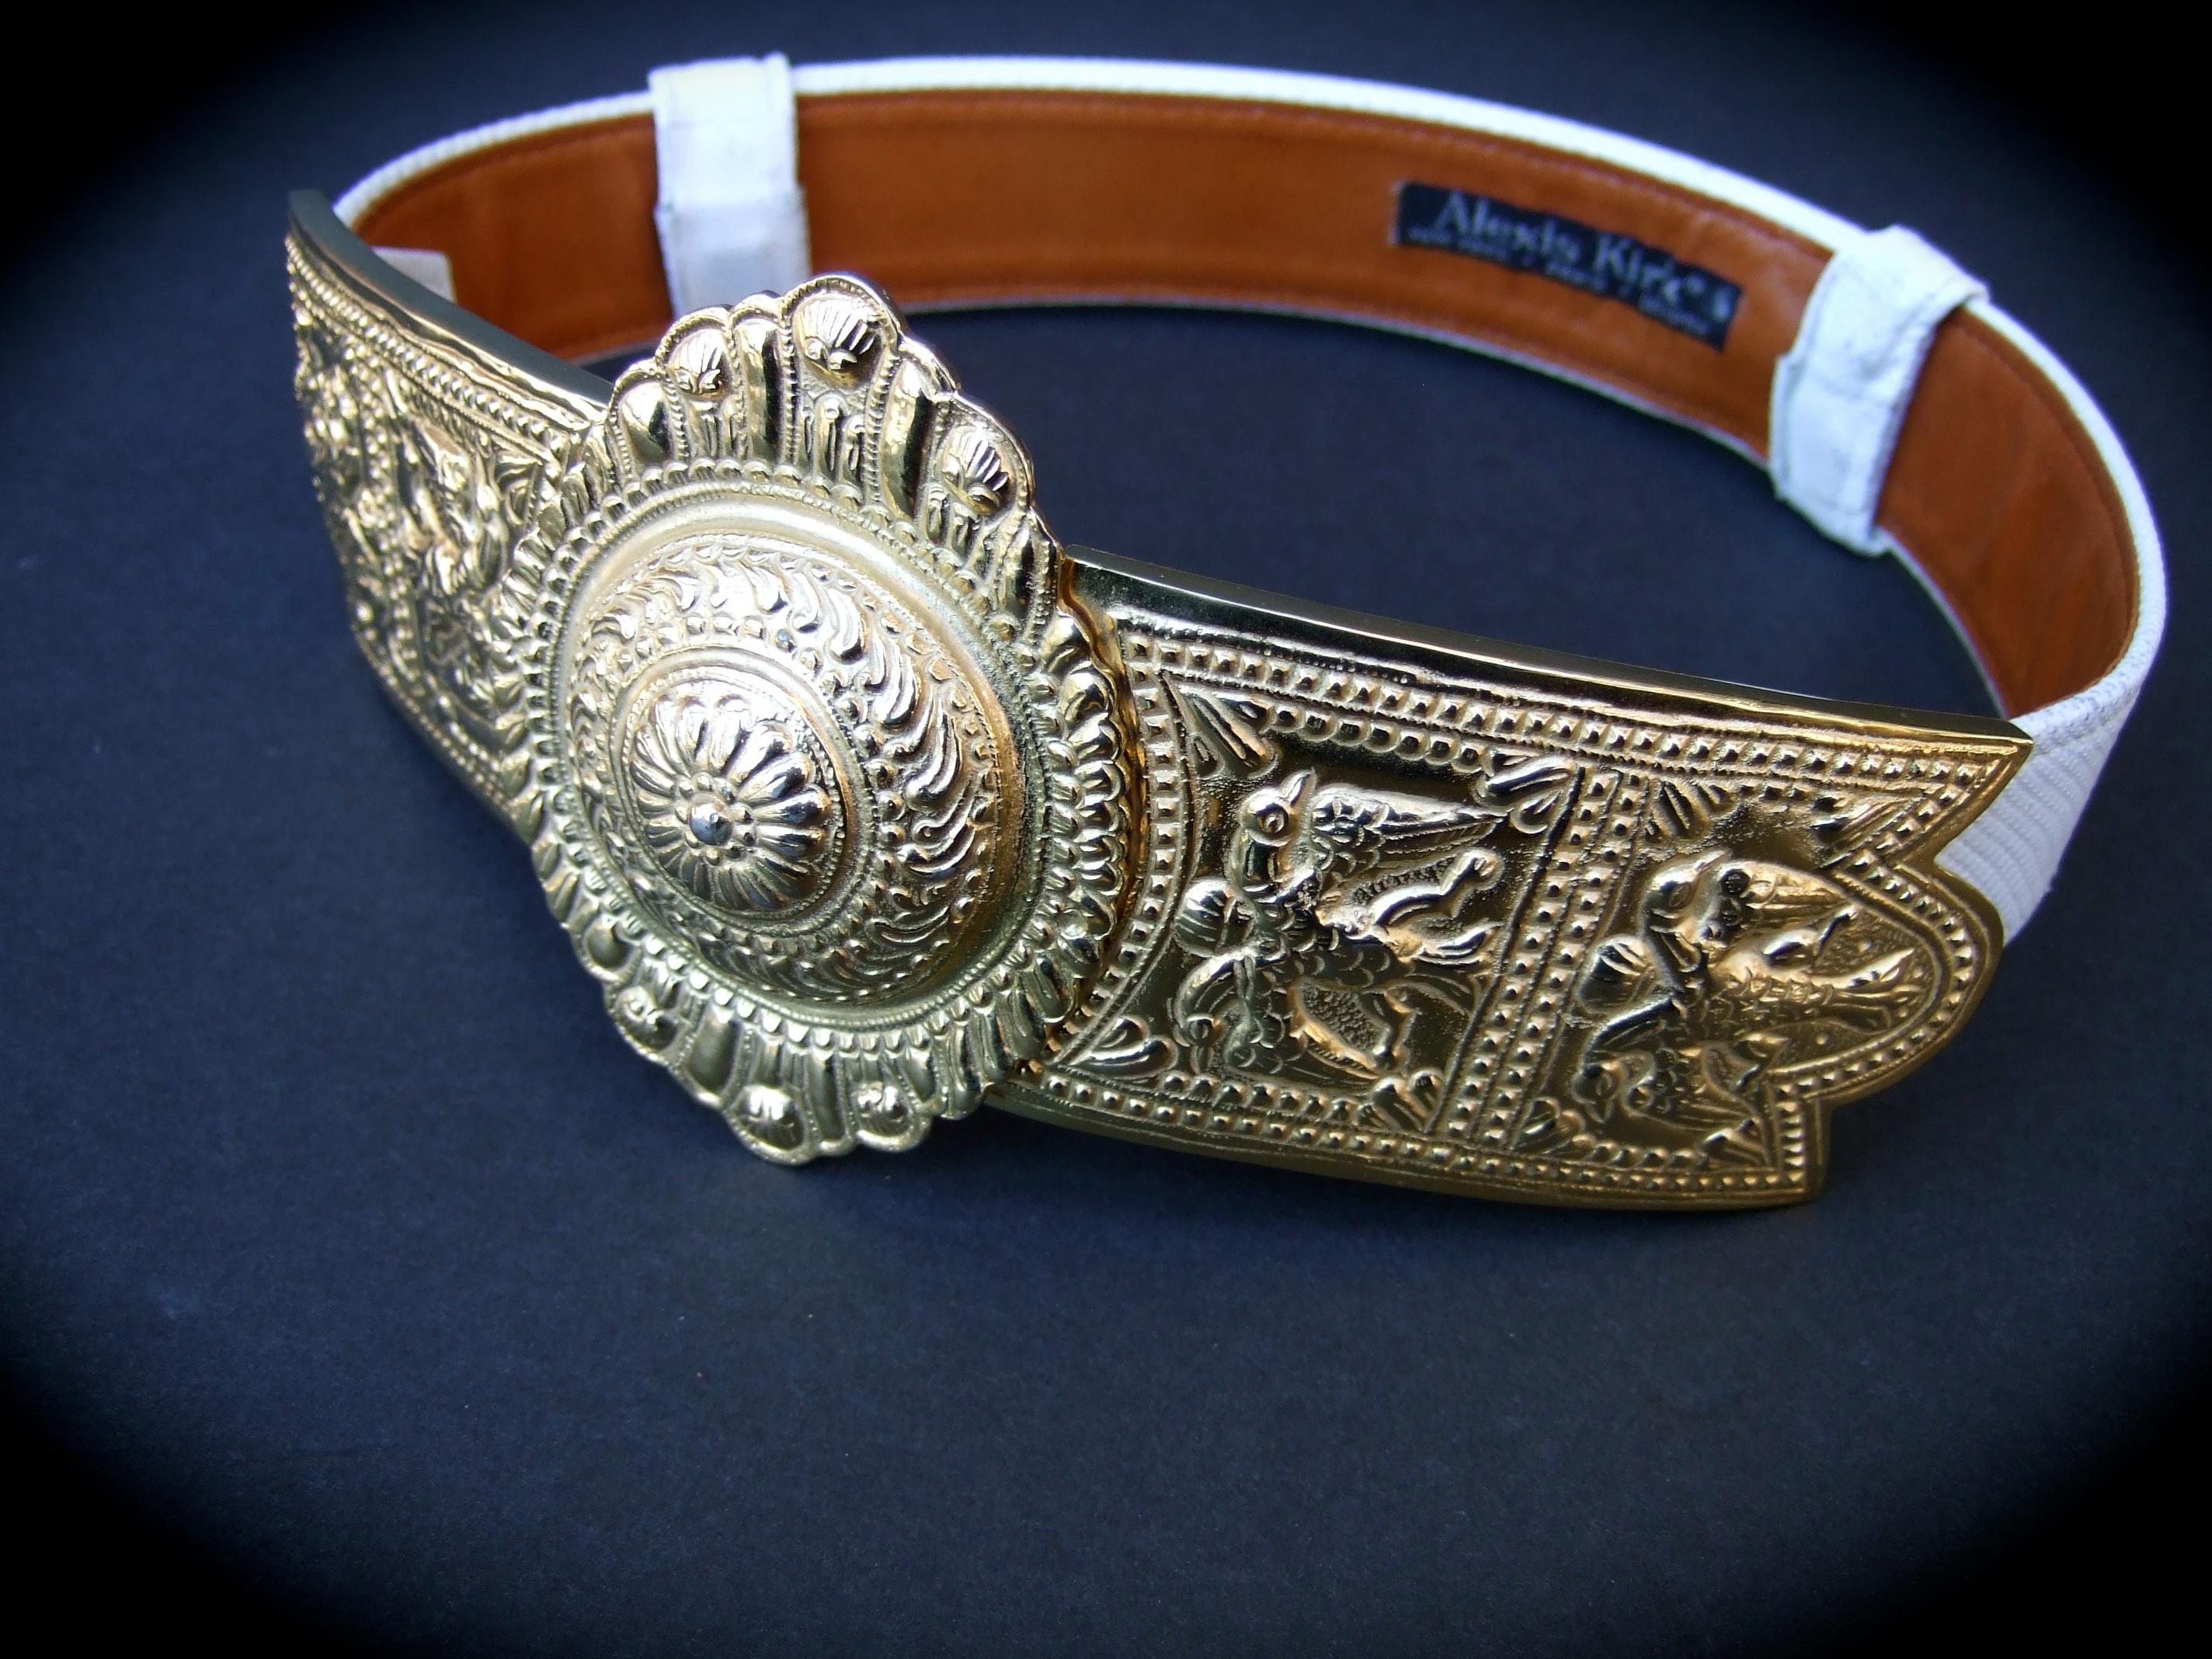 Alexis Kirk Massive Ornate Etruscan Style Embossed White Leather Belt c 1980s 4